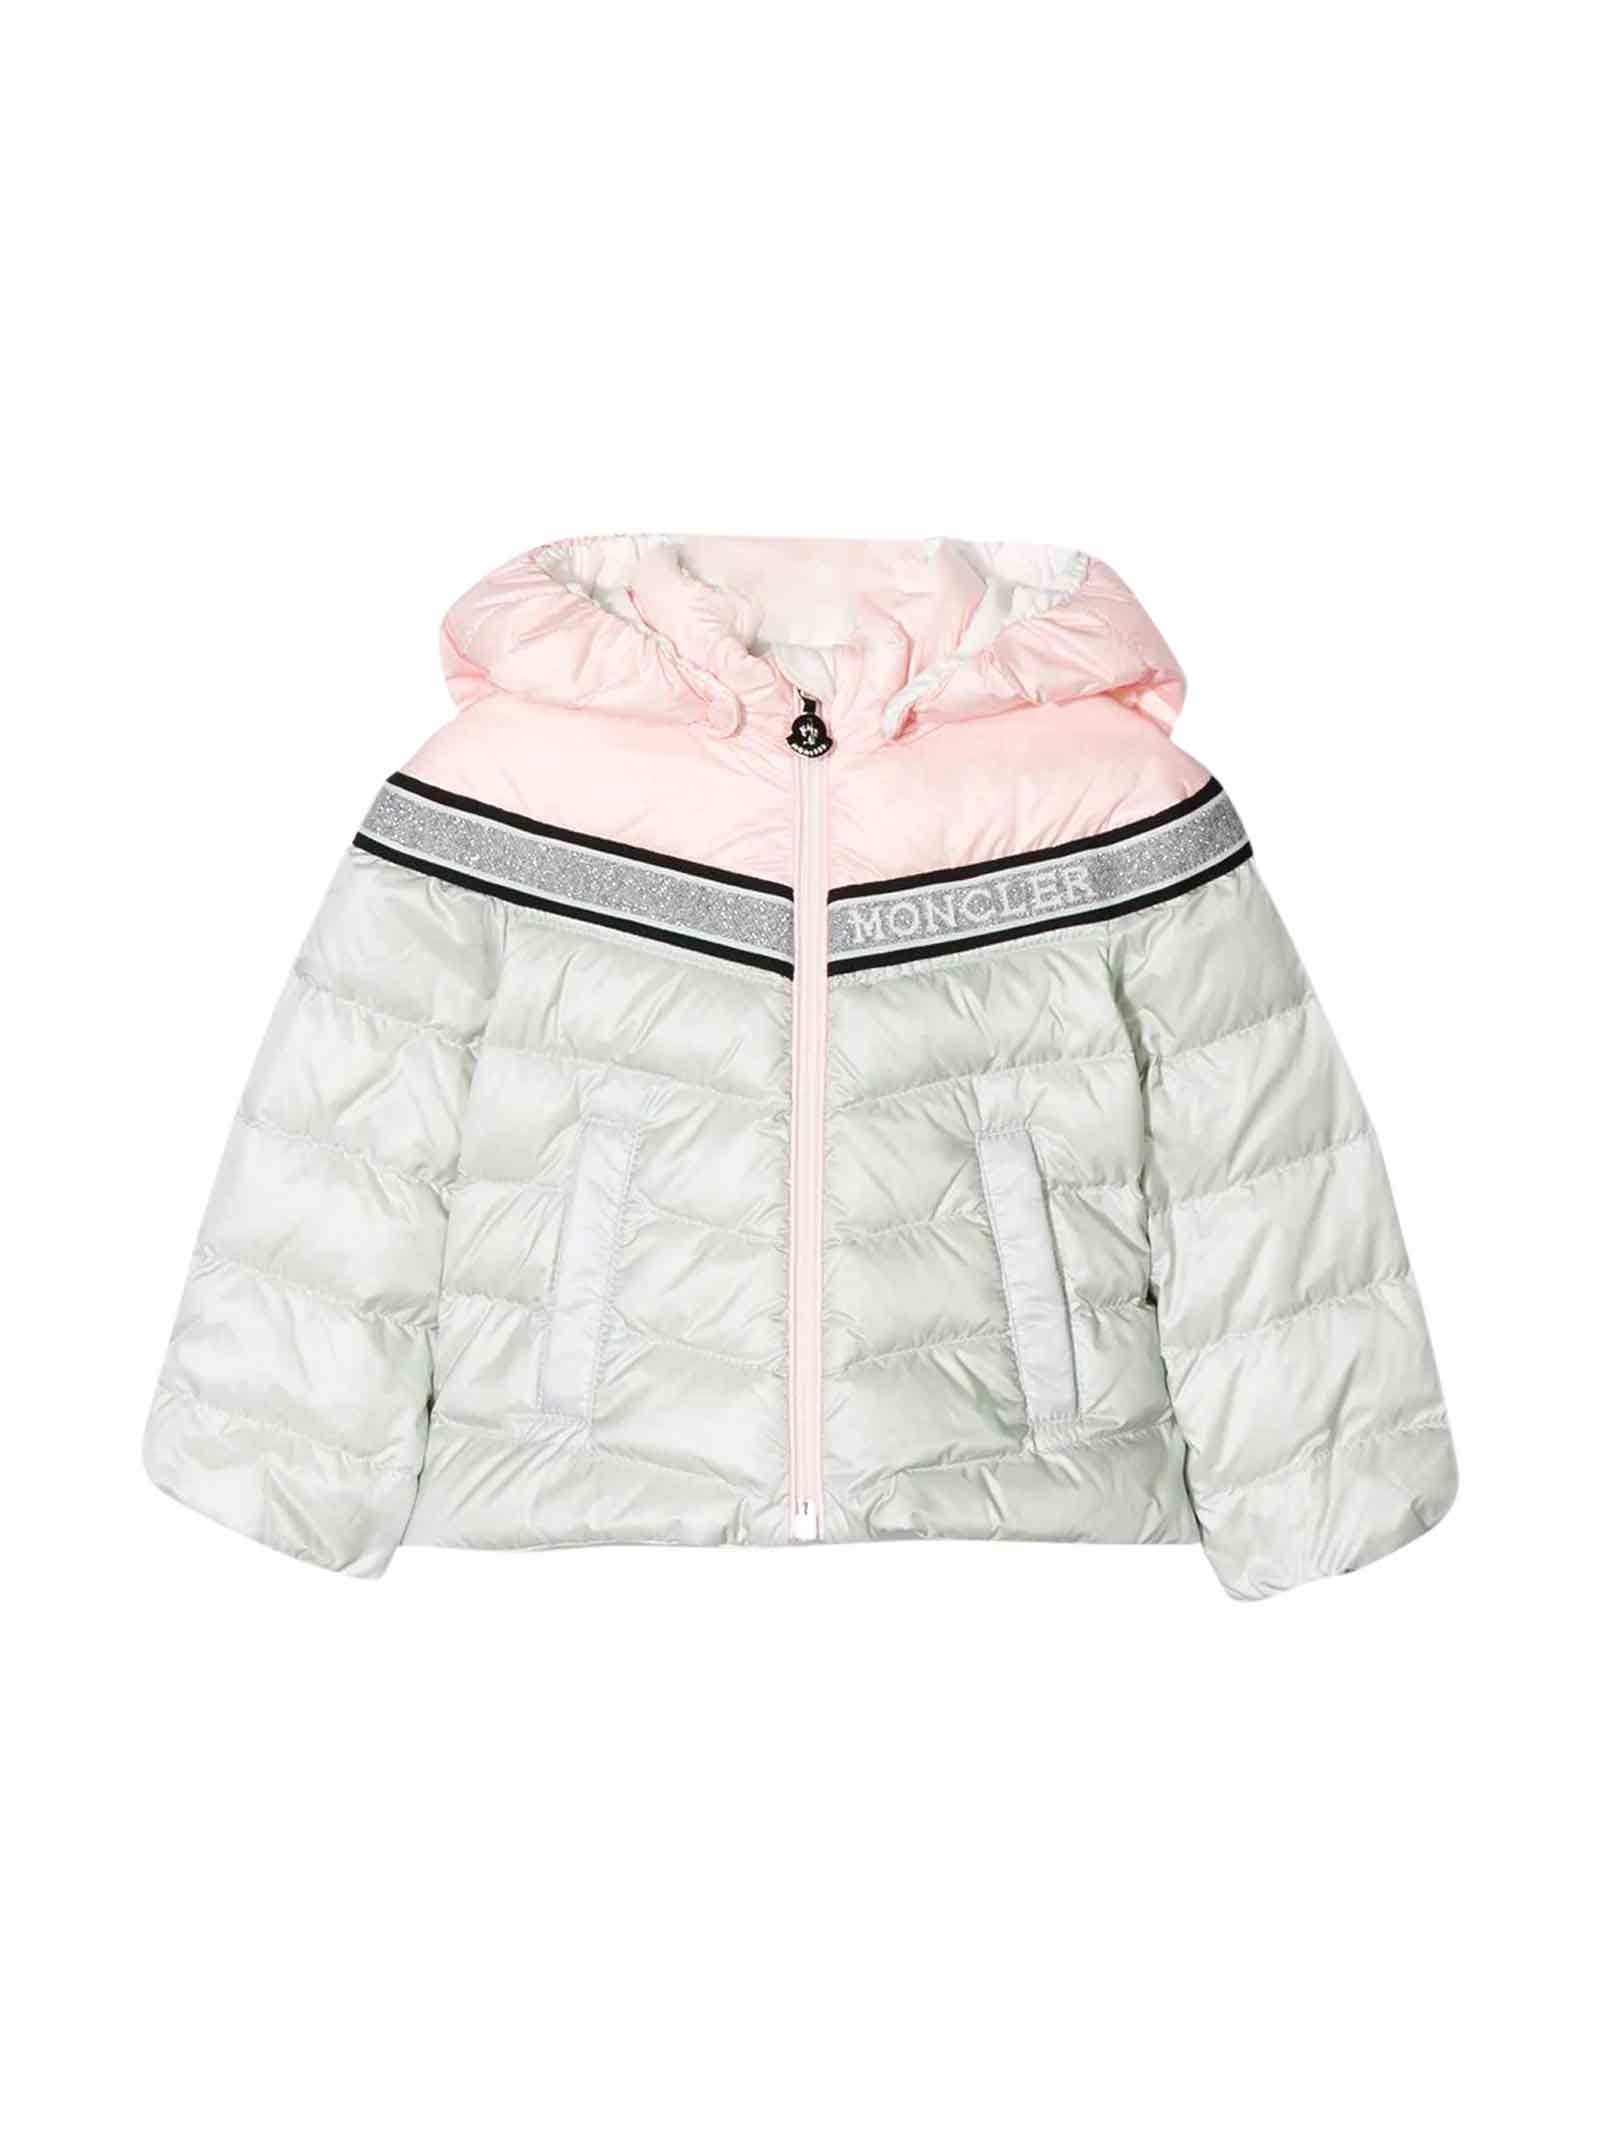 MONCLER WHITE AND LIGHT PINK LIGHTWEIGHT JACKET,11218225